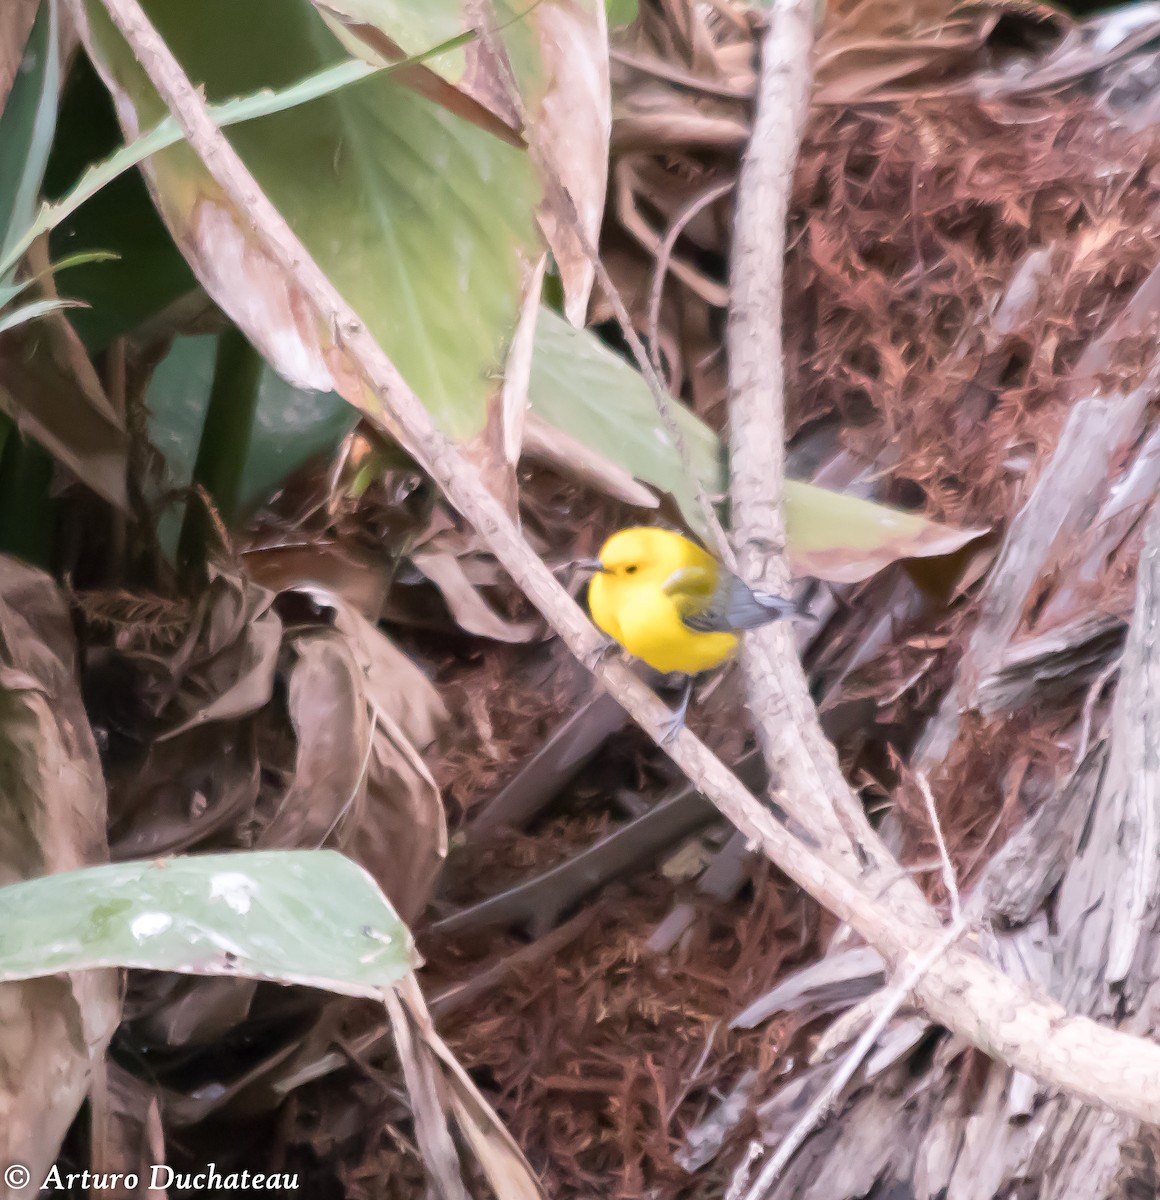 Prothonotary Warbler - Arturo Duchateau